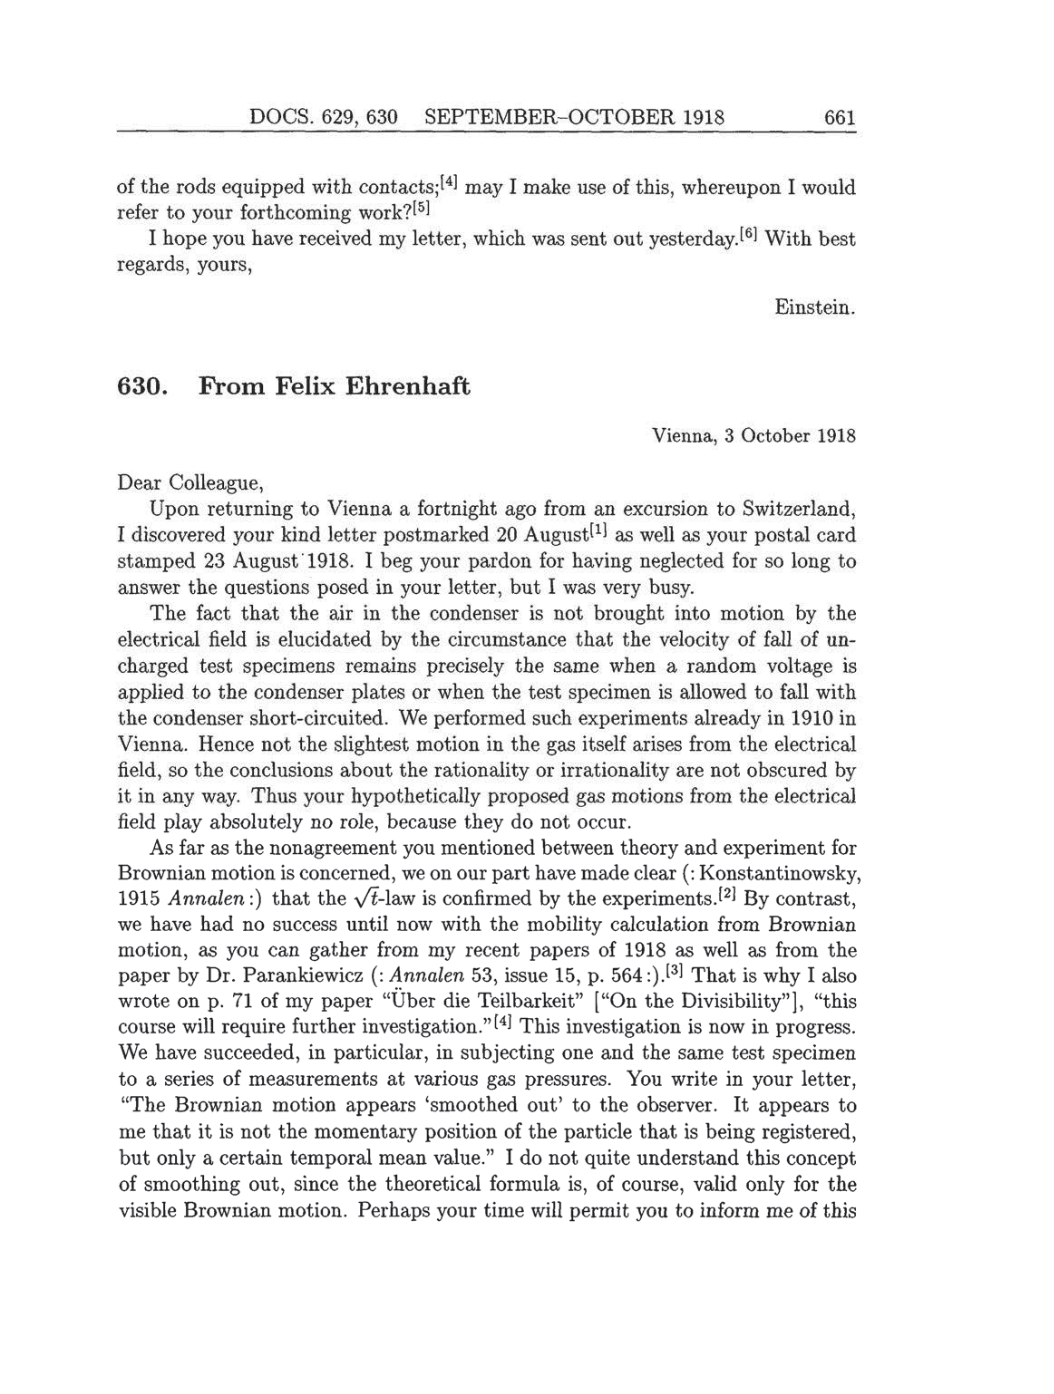 Volume 8: The Berlin Years: Correspondence, 1914-1918 (English translation supplement) page 661